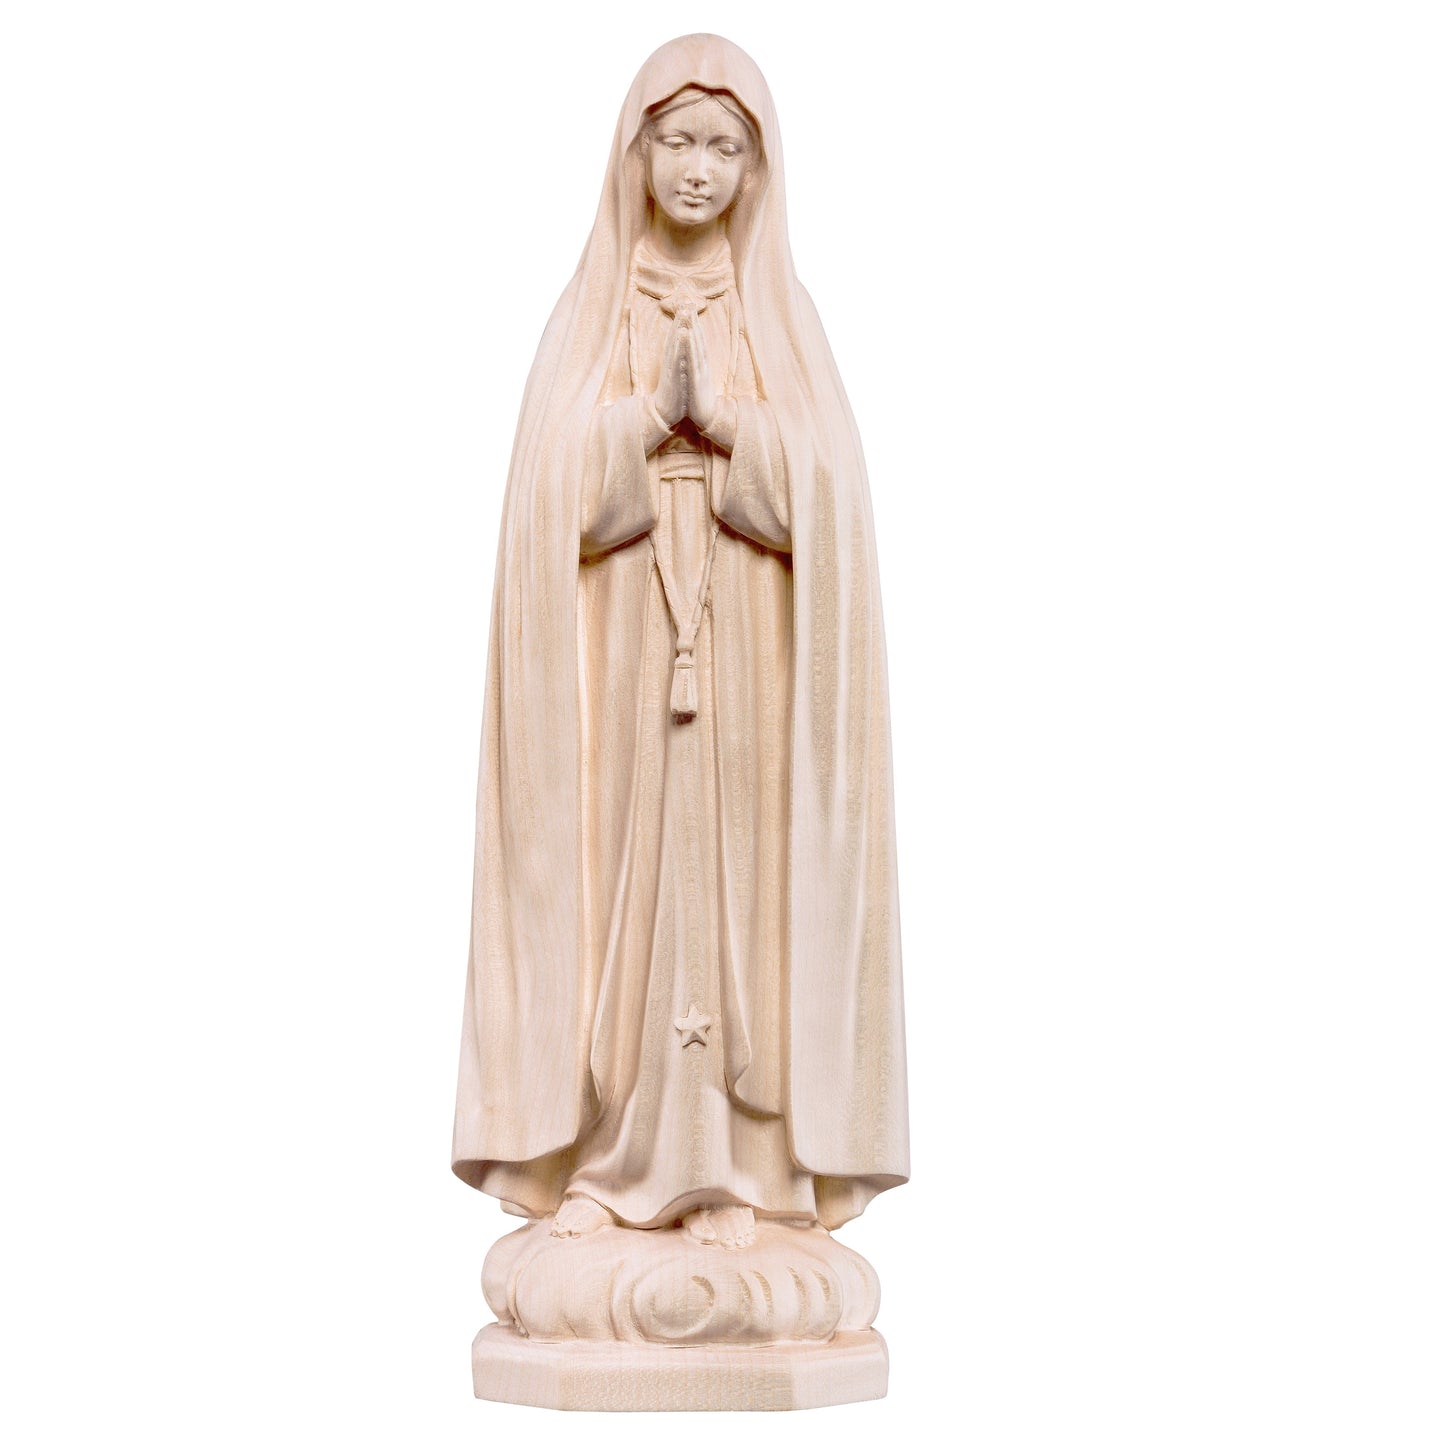 MONDO CATTOLICO Natural / 15 cm (5.9 in) Wooden statue of Our Lady of Fátima